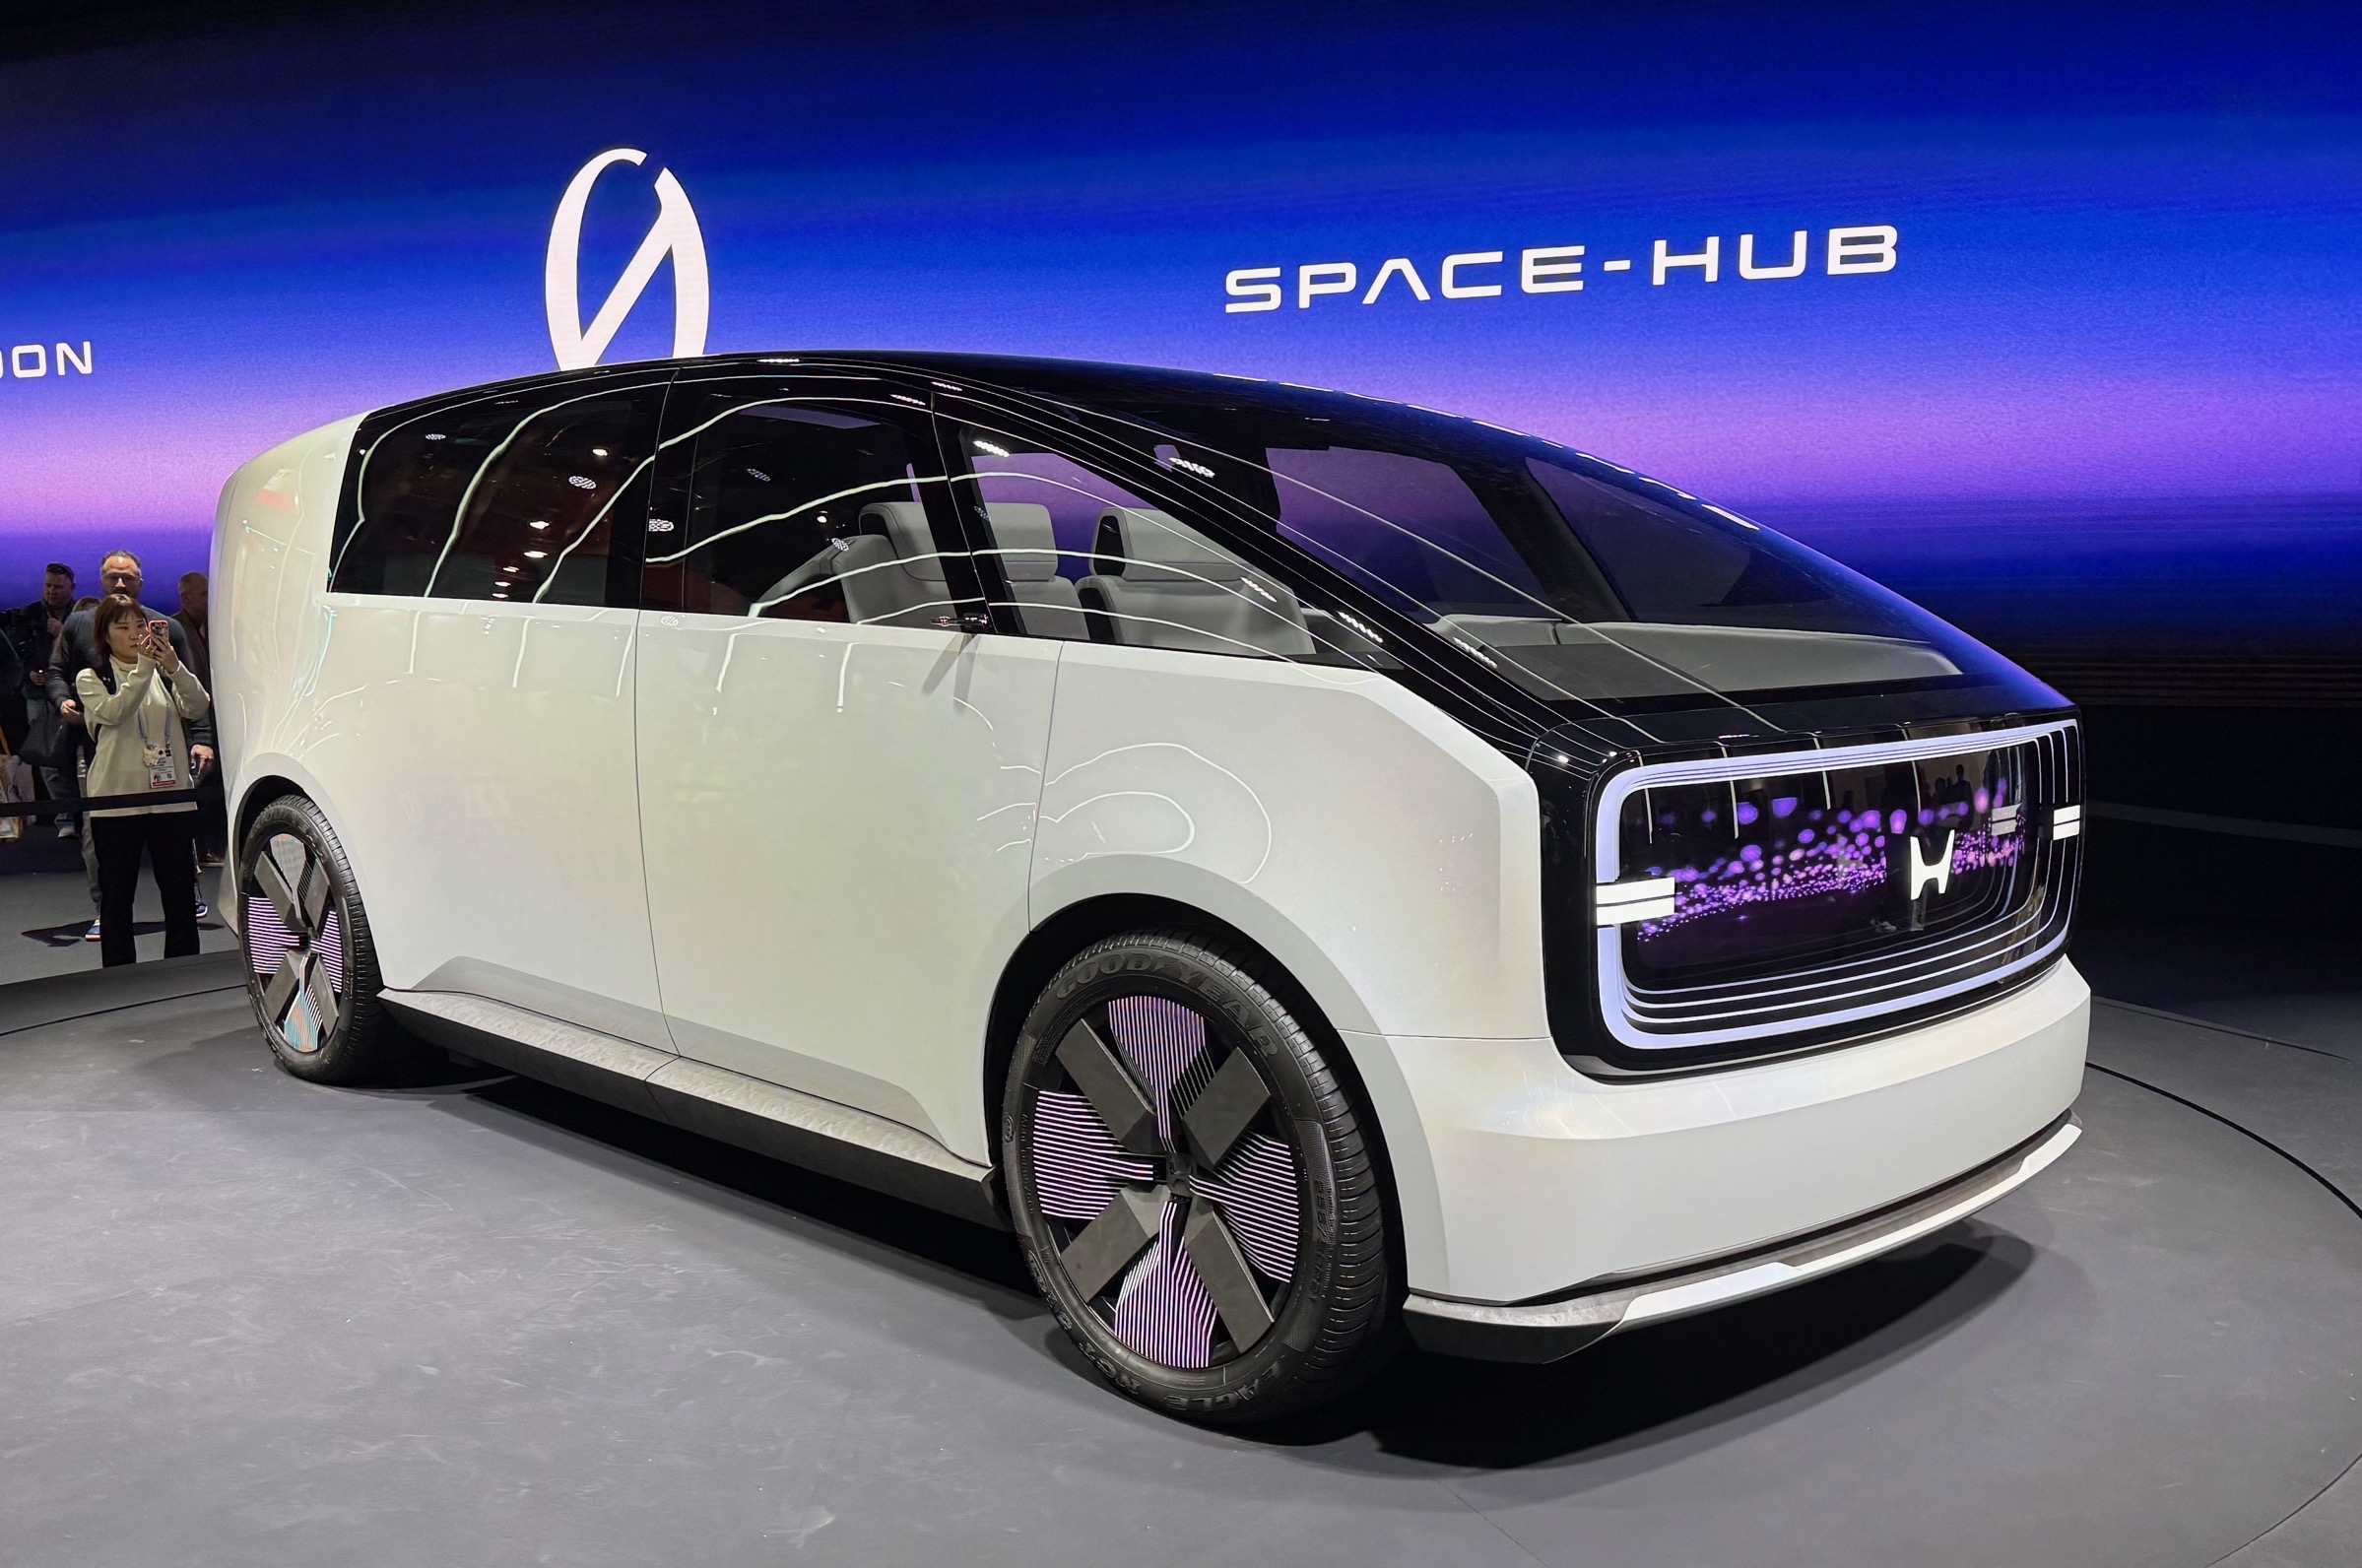 Honda Space-Hub. A boxy van with an all glass roof, high doors. it's on a spinning thing and it says Space-Hub behind it with the new silly logo.